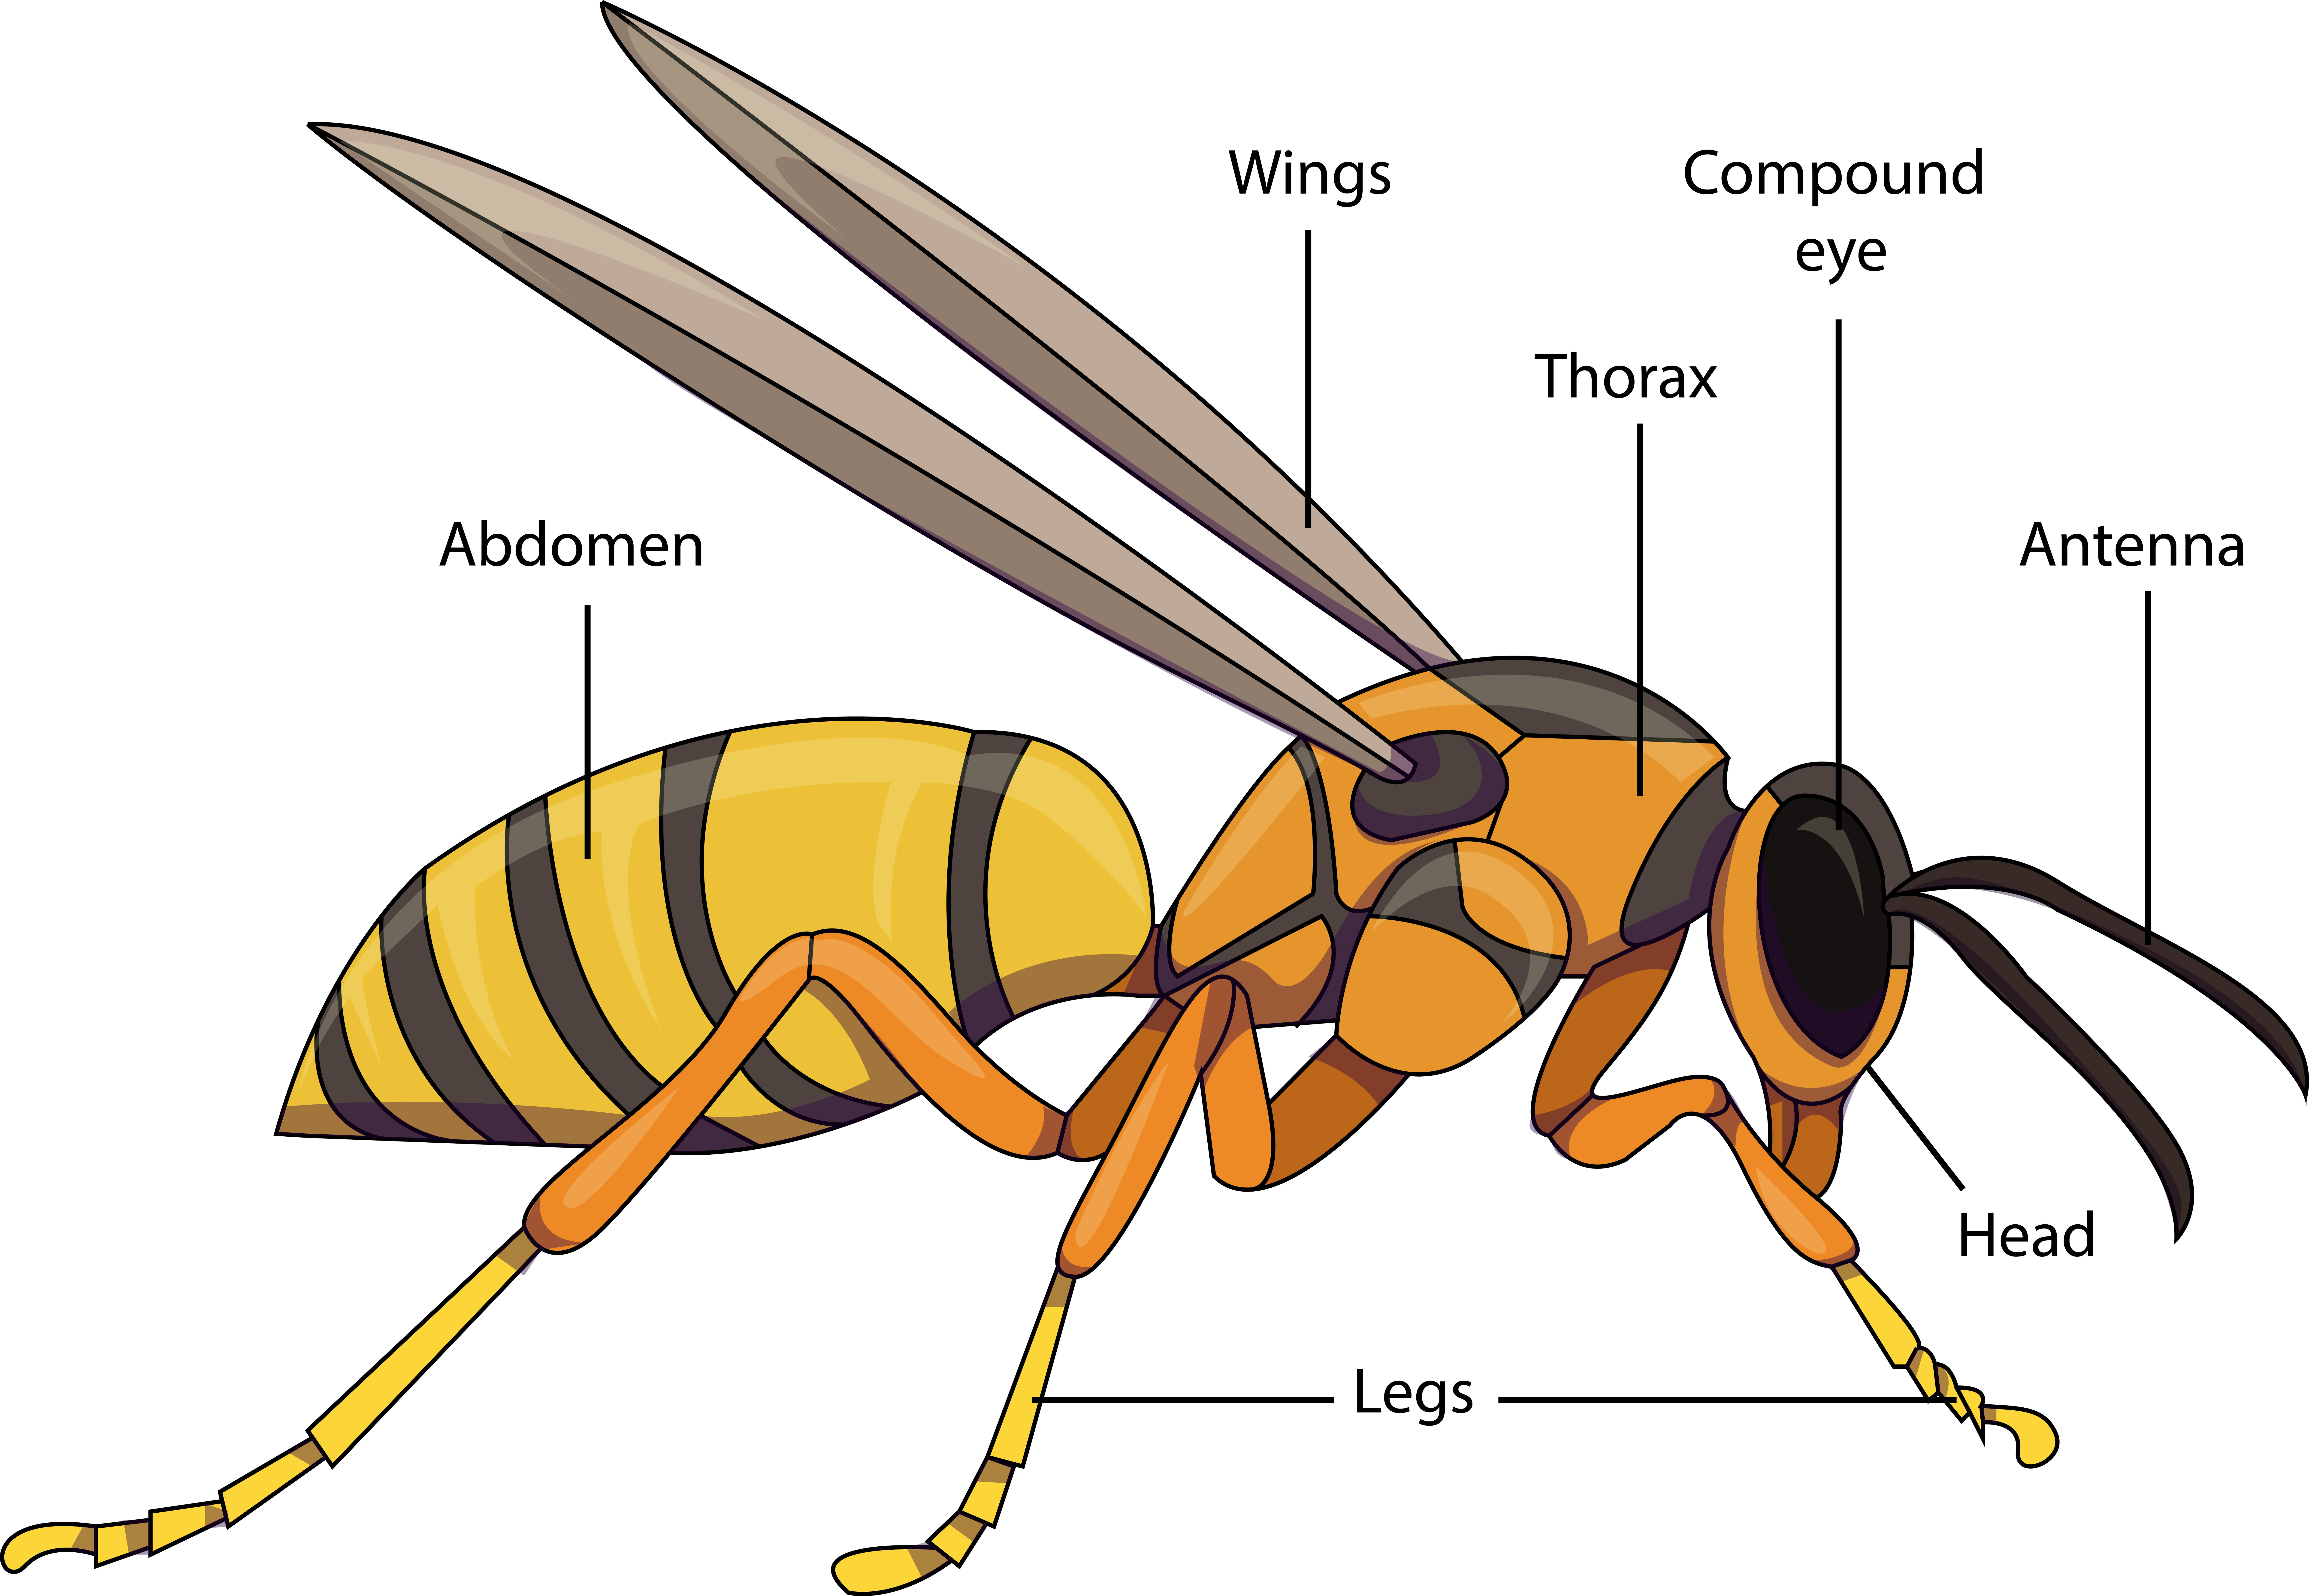 What Are The Three Segments Of An Insects Body Called